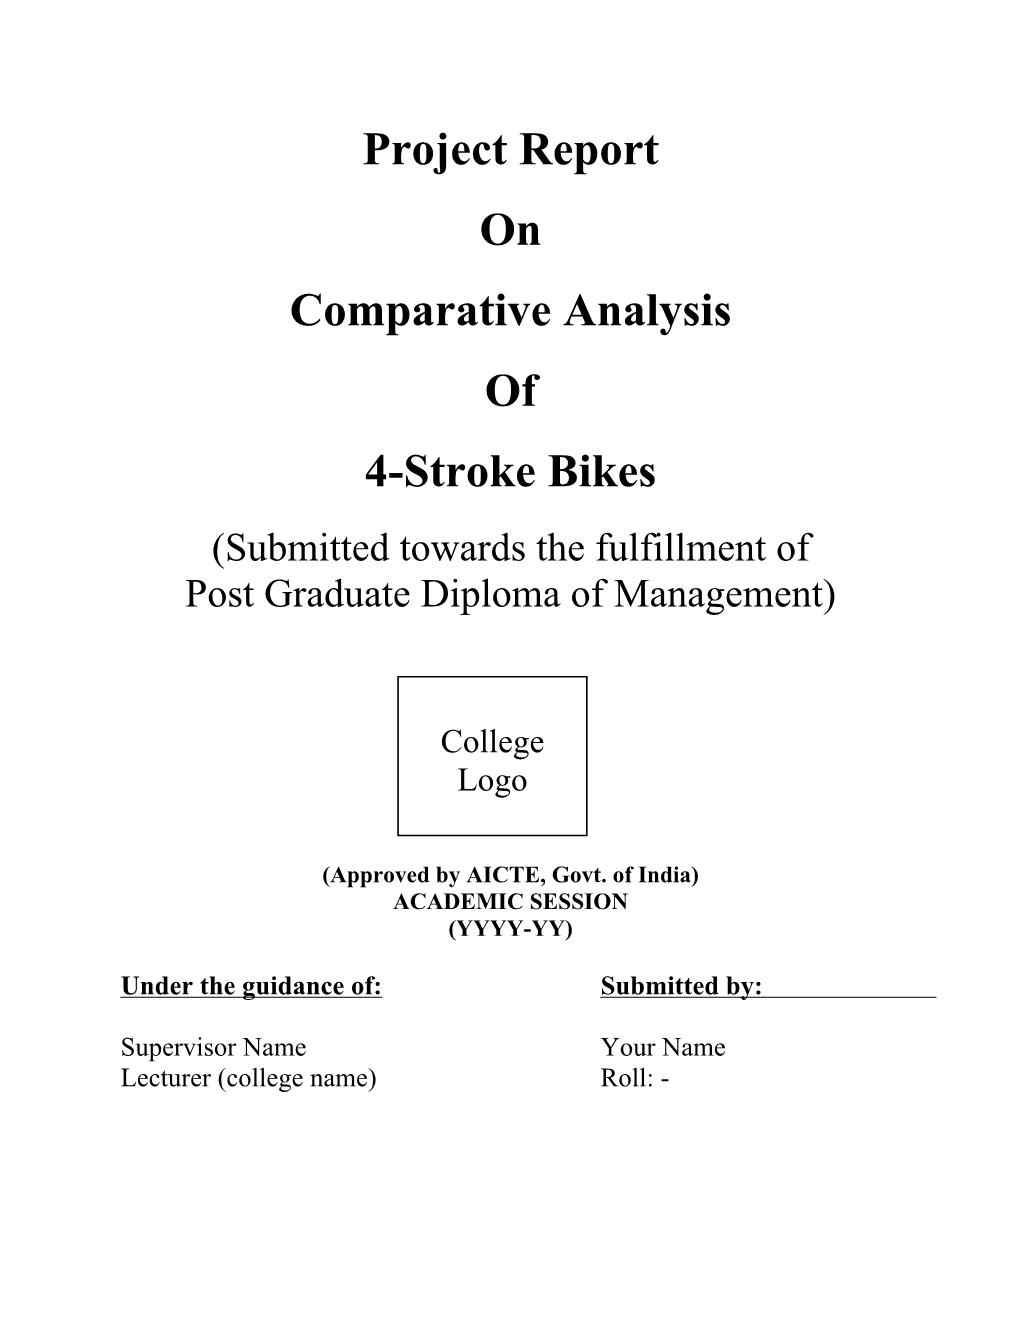 Project Report on Comparative Analysis of 4Stroke Bikes